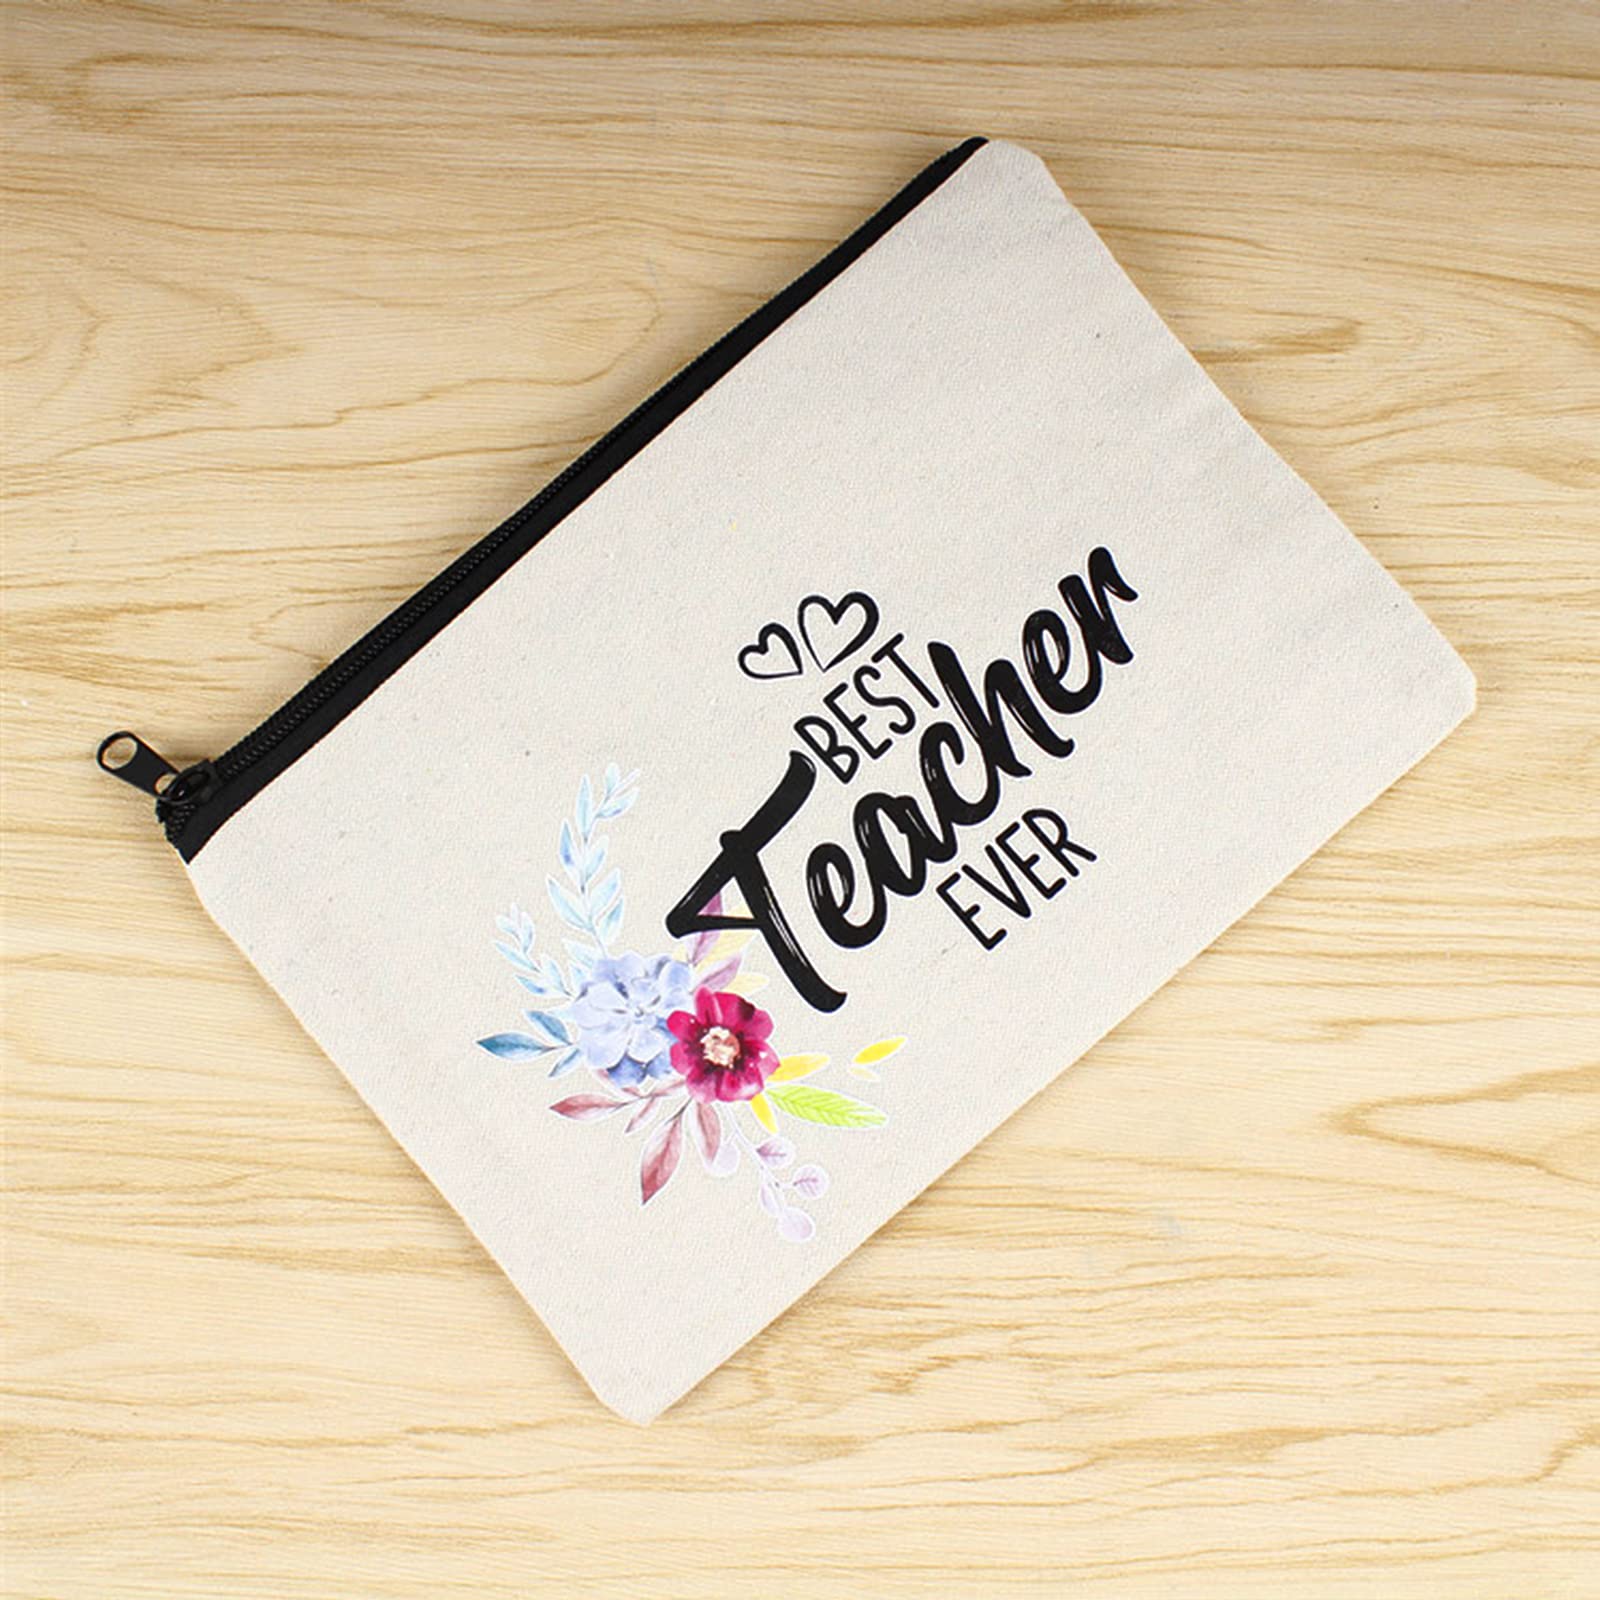 ZUER Canvas Bags, 2pcs Pencil Case, Blank Makeup Bags,Use for  Pencil,Pen,Money,DIY,Craft and Cosmetics,White